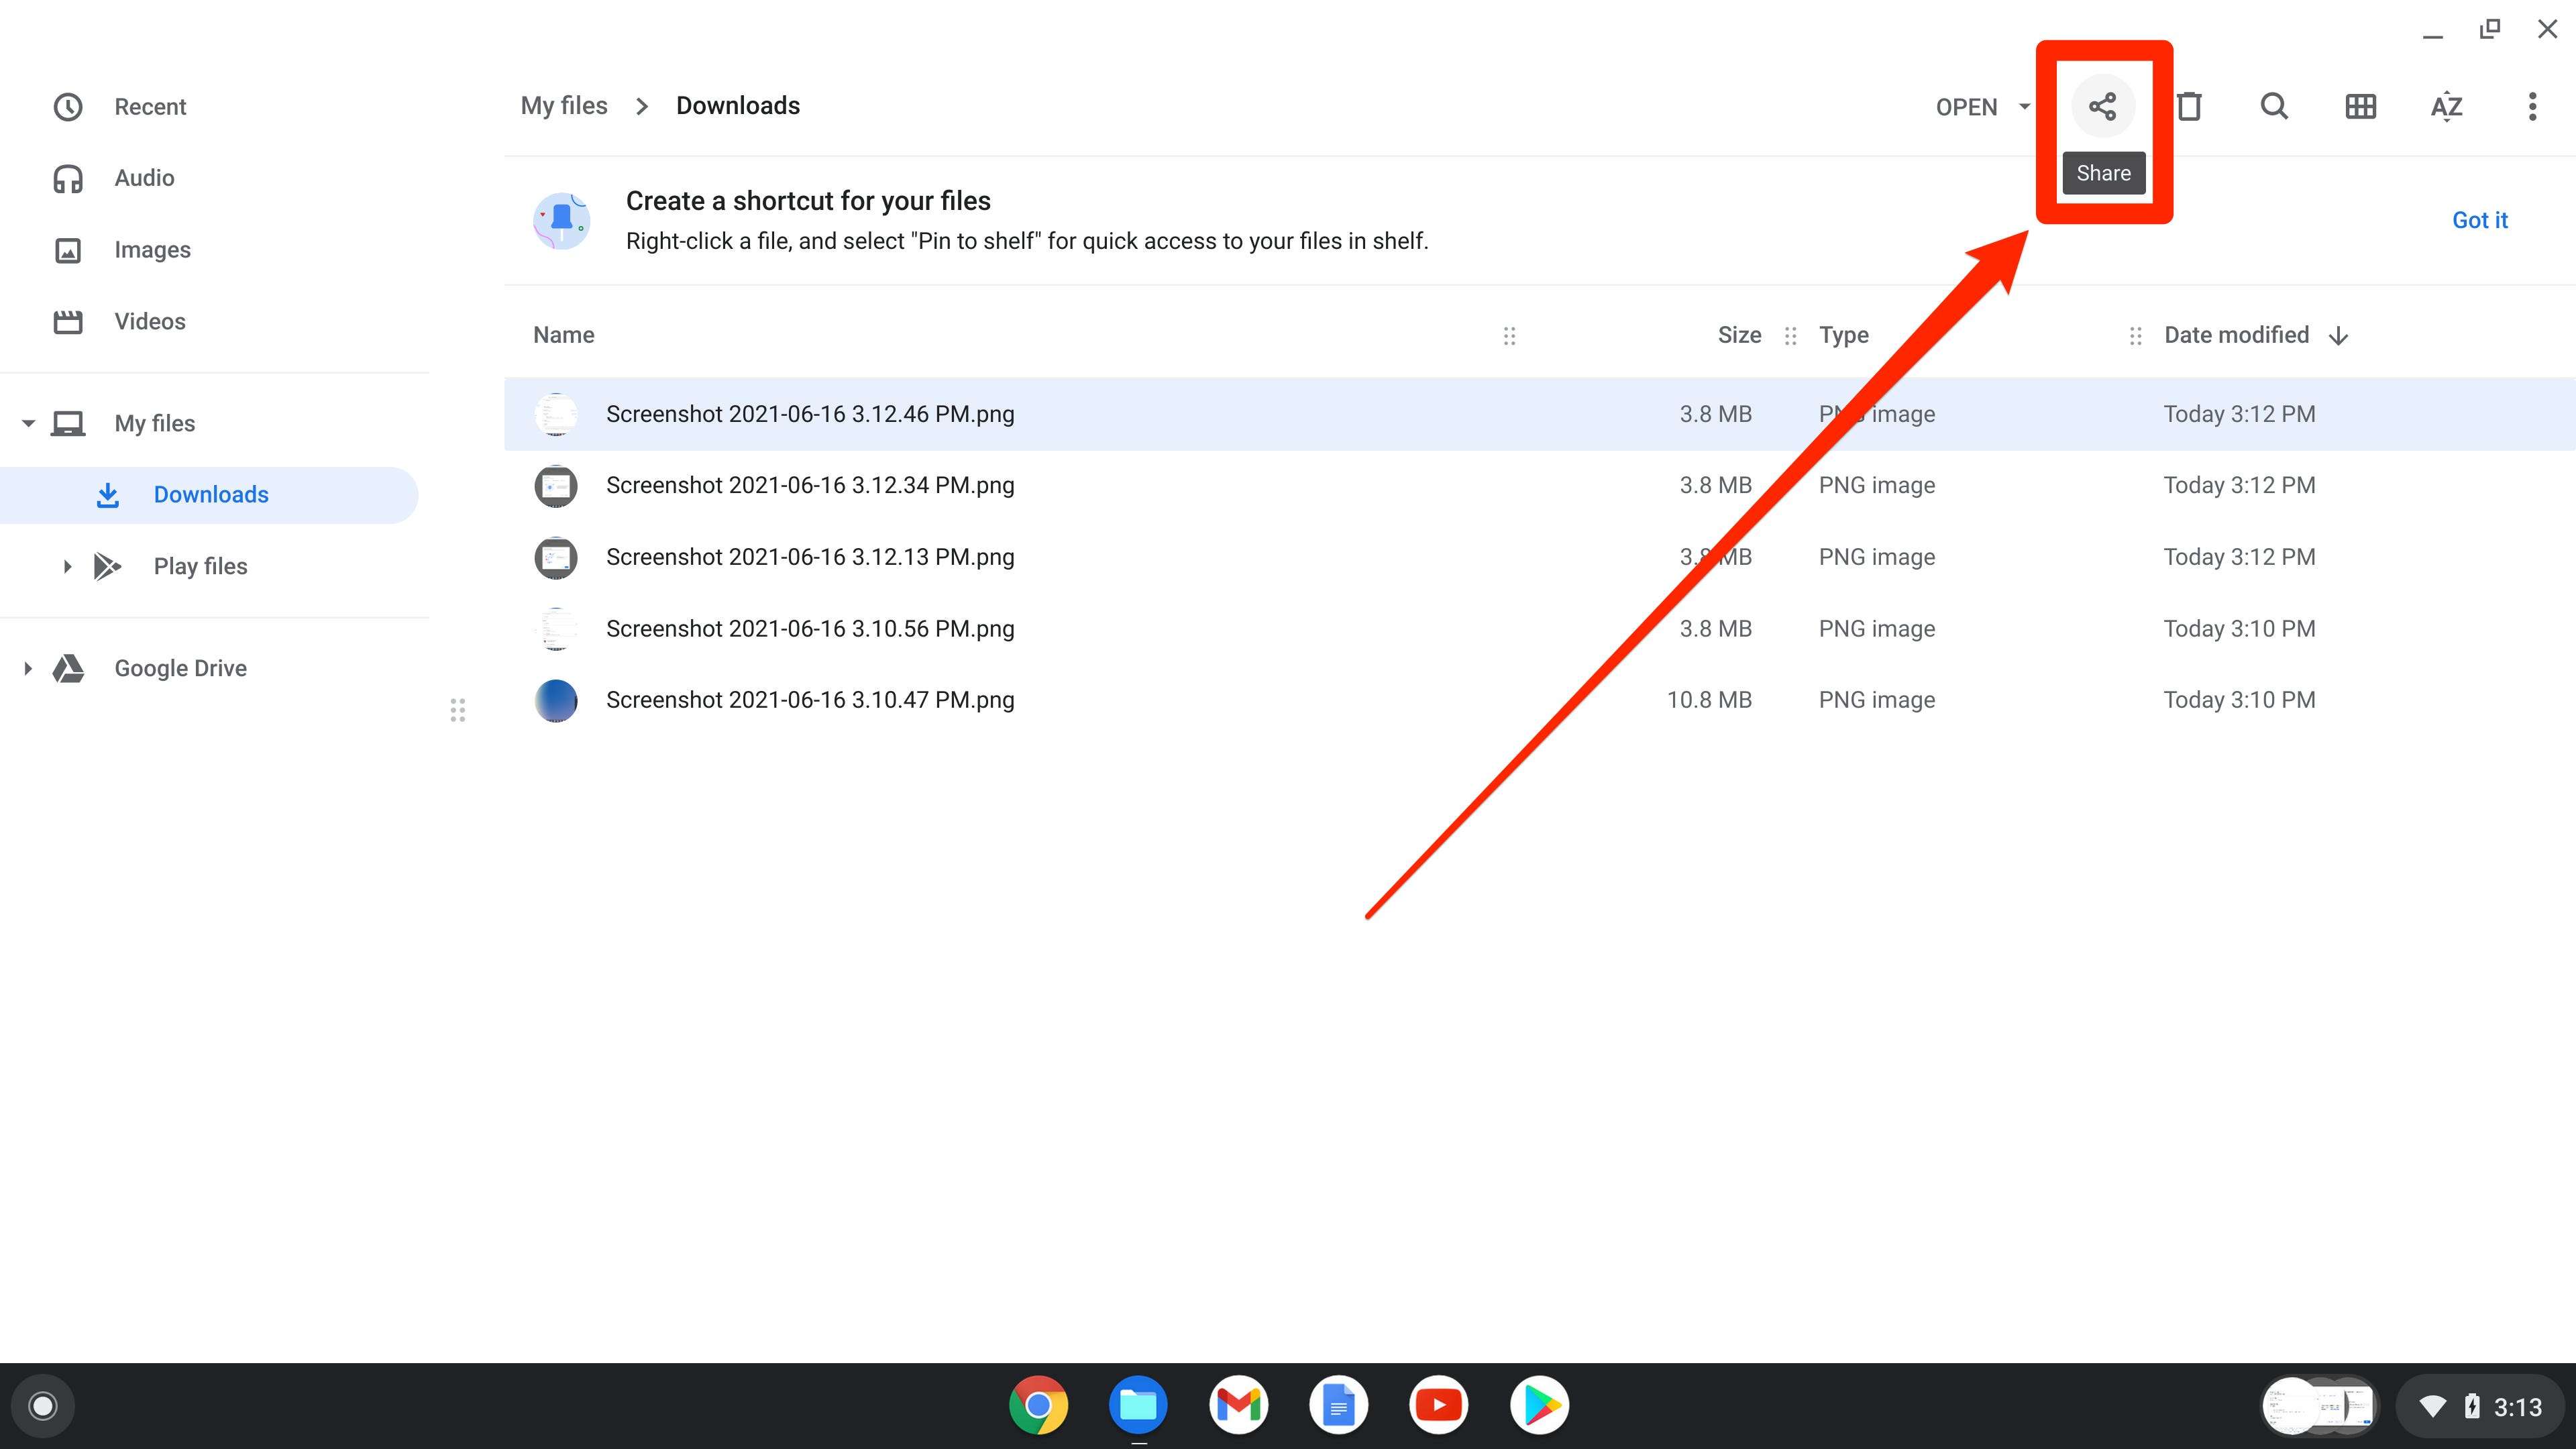 how to remove nearby share from google files